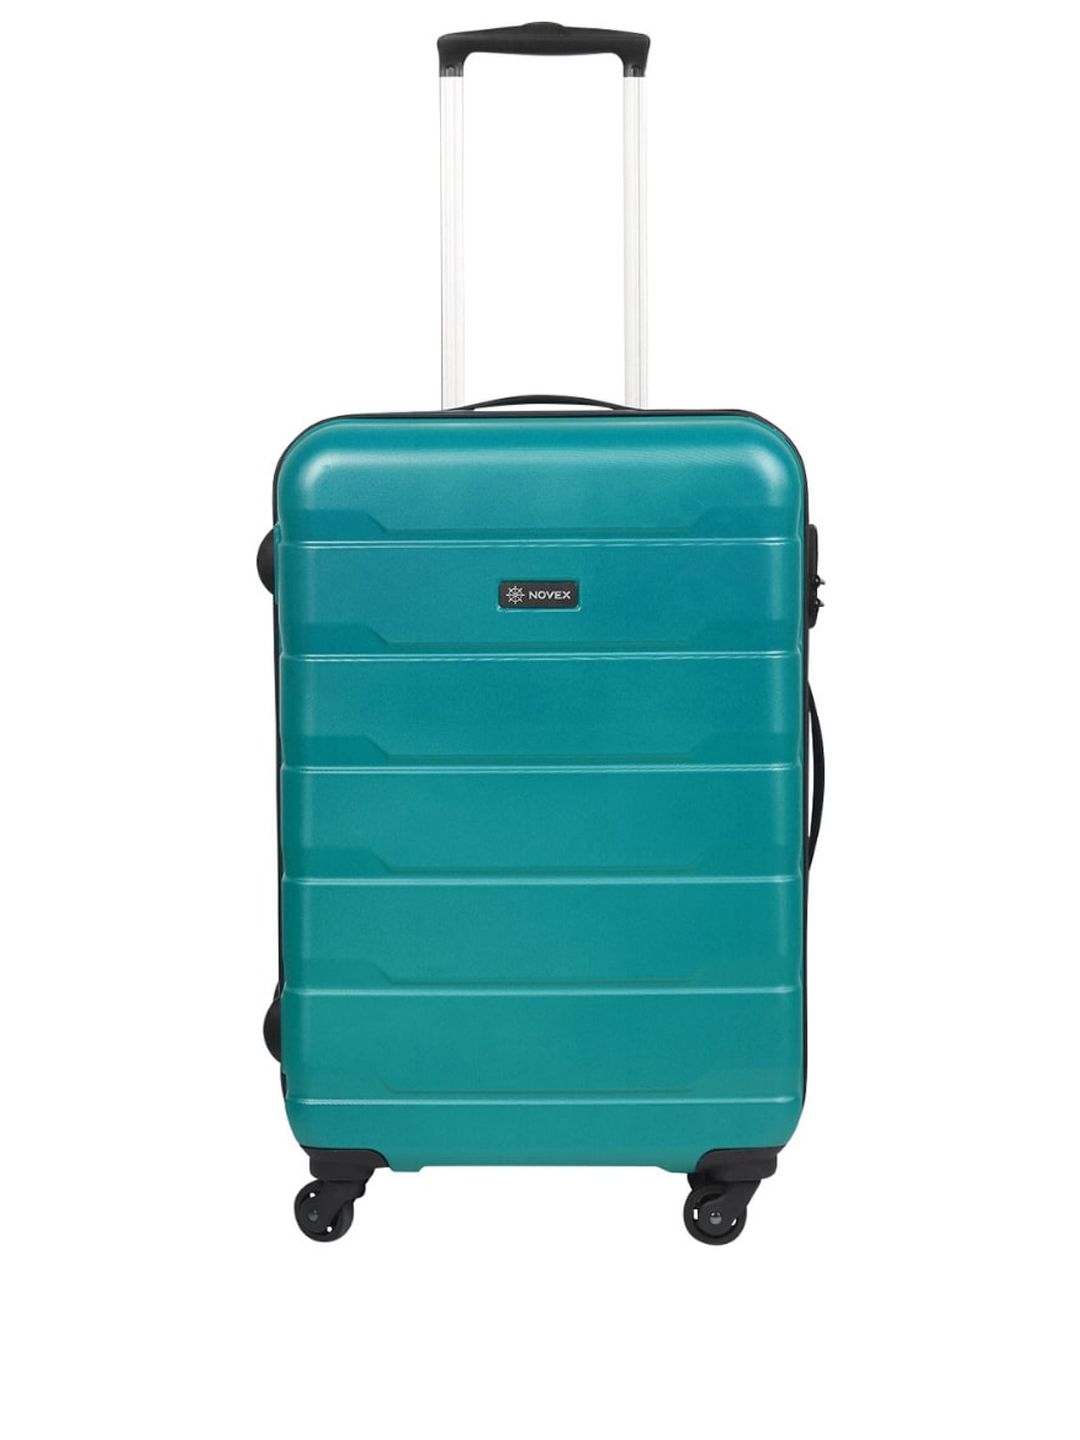 NOVEX Green Textured Medium Hard-Sided Trolley Suitcase Price in India